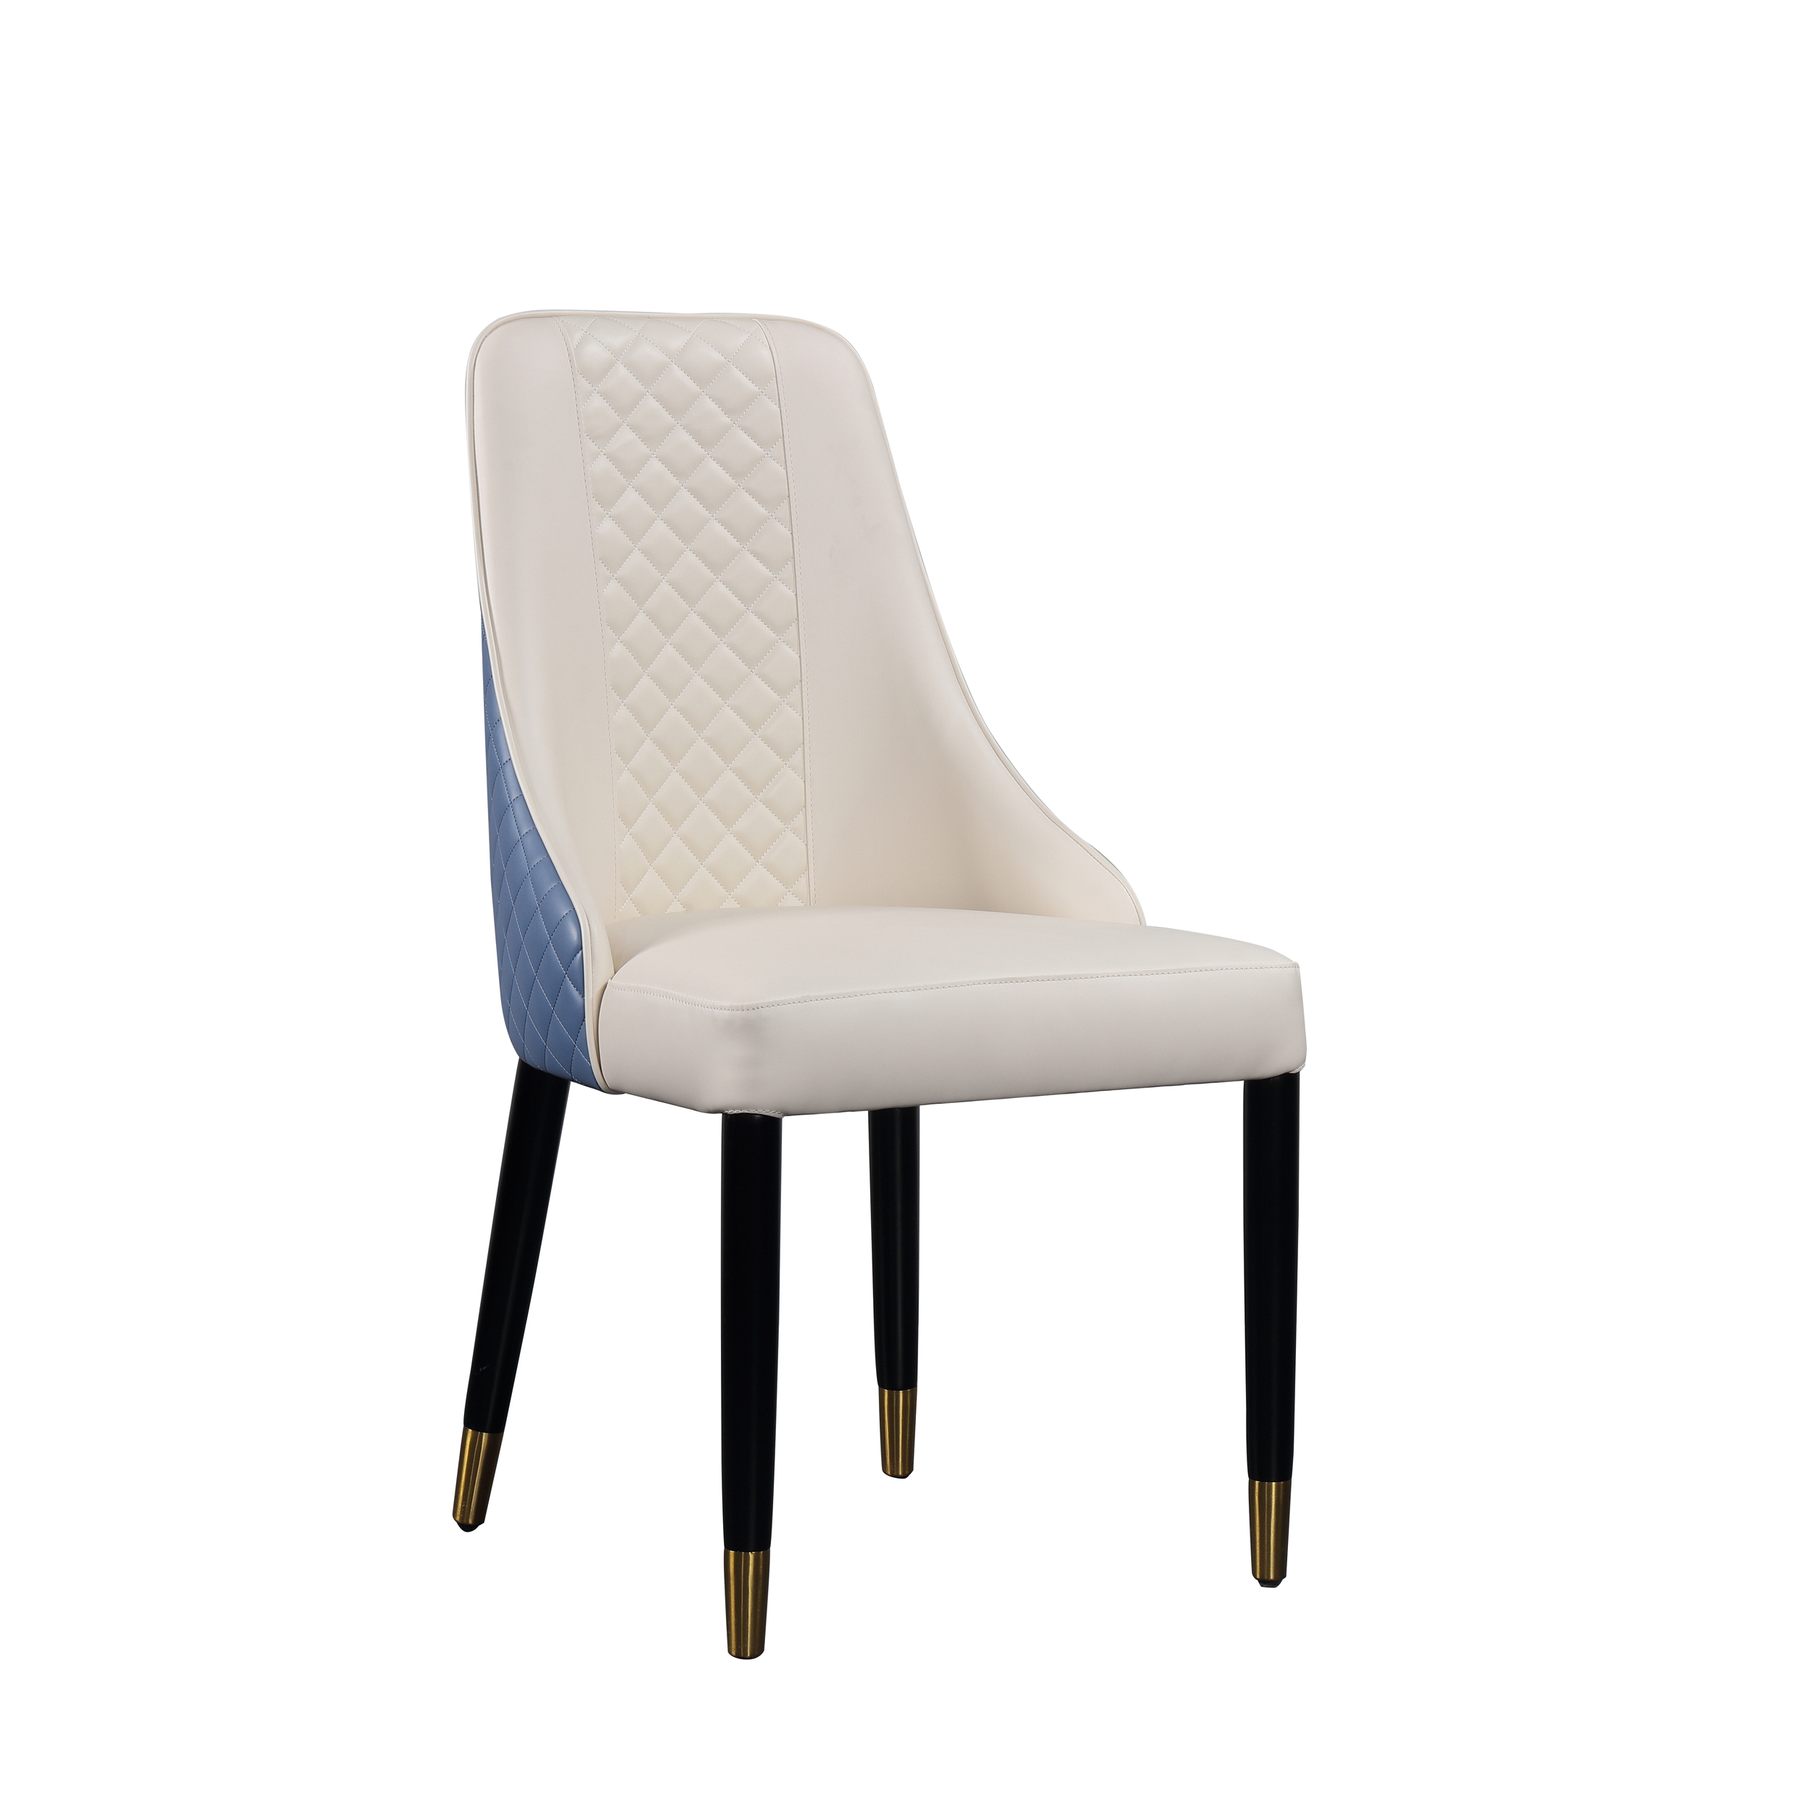 FS-D026 Dining Chair